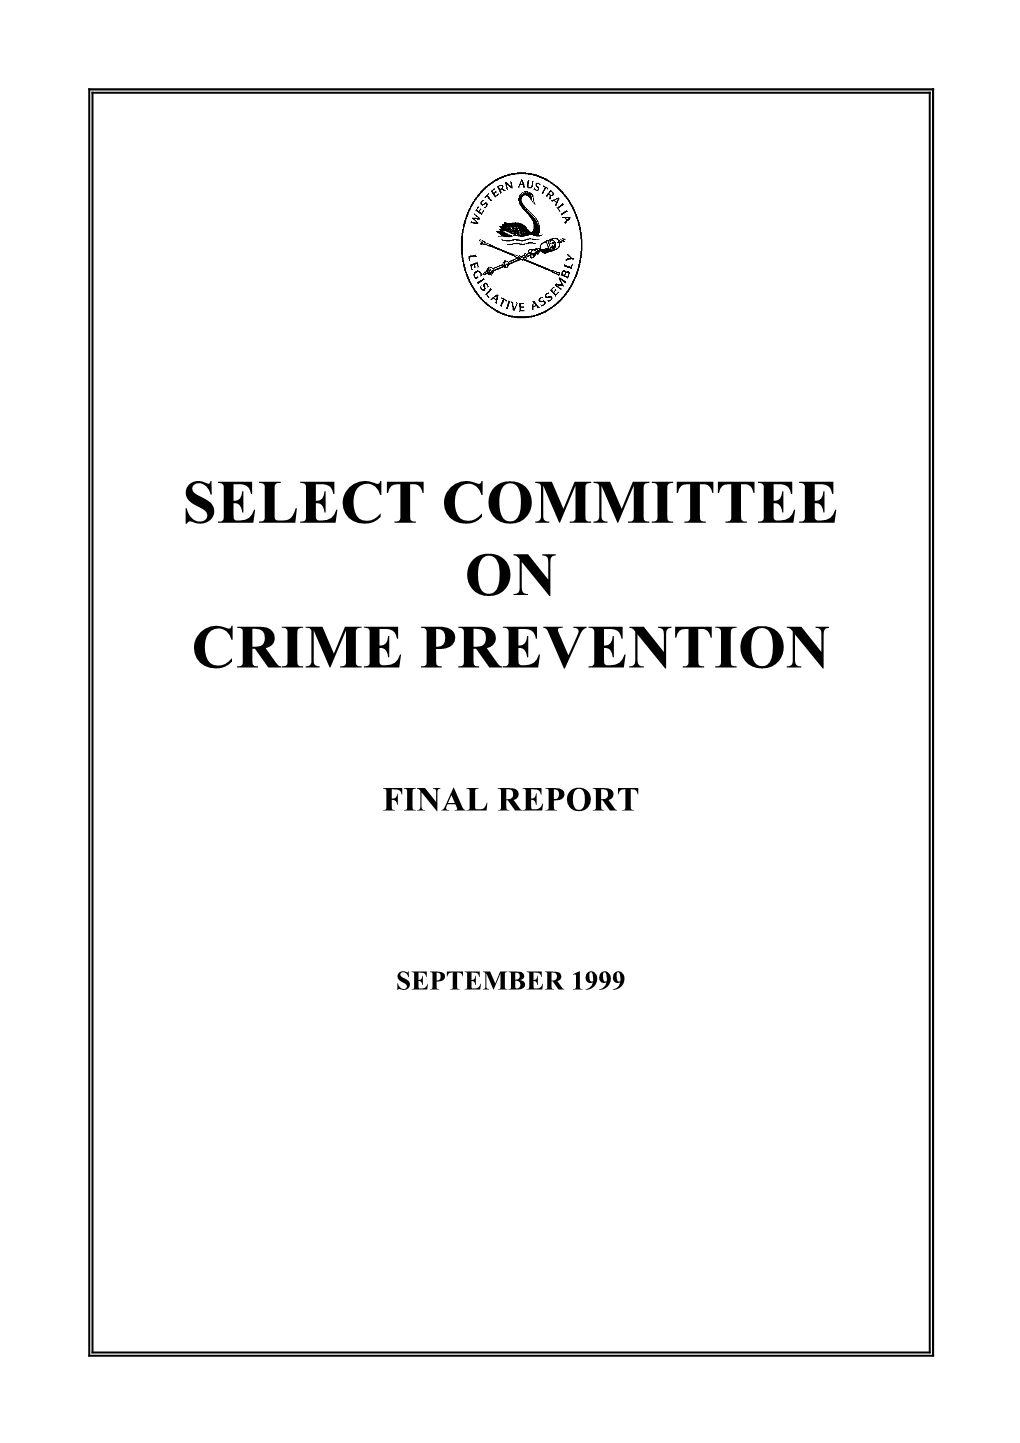 Select Committee on Crime Prevention